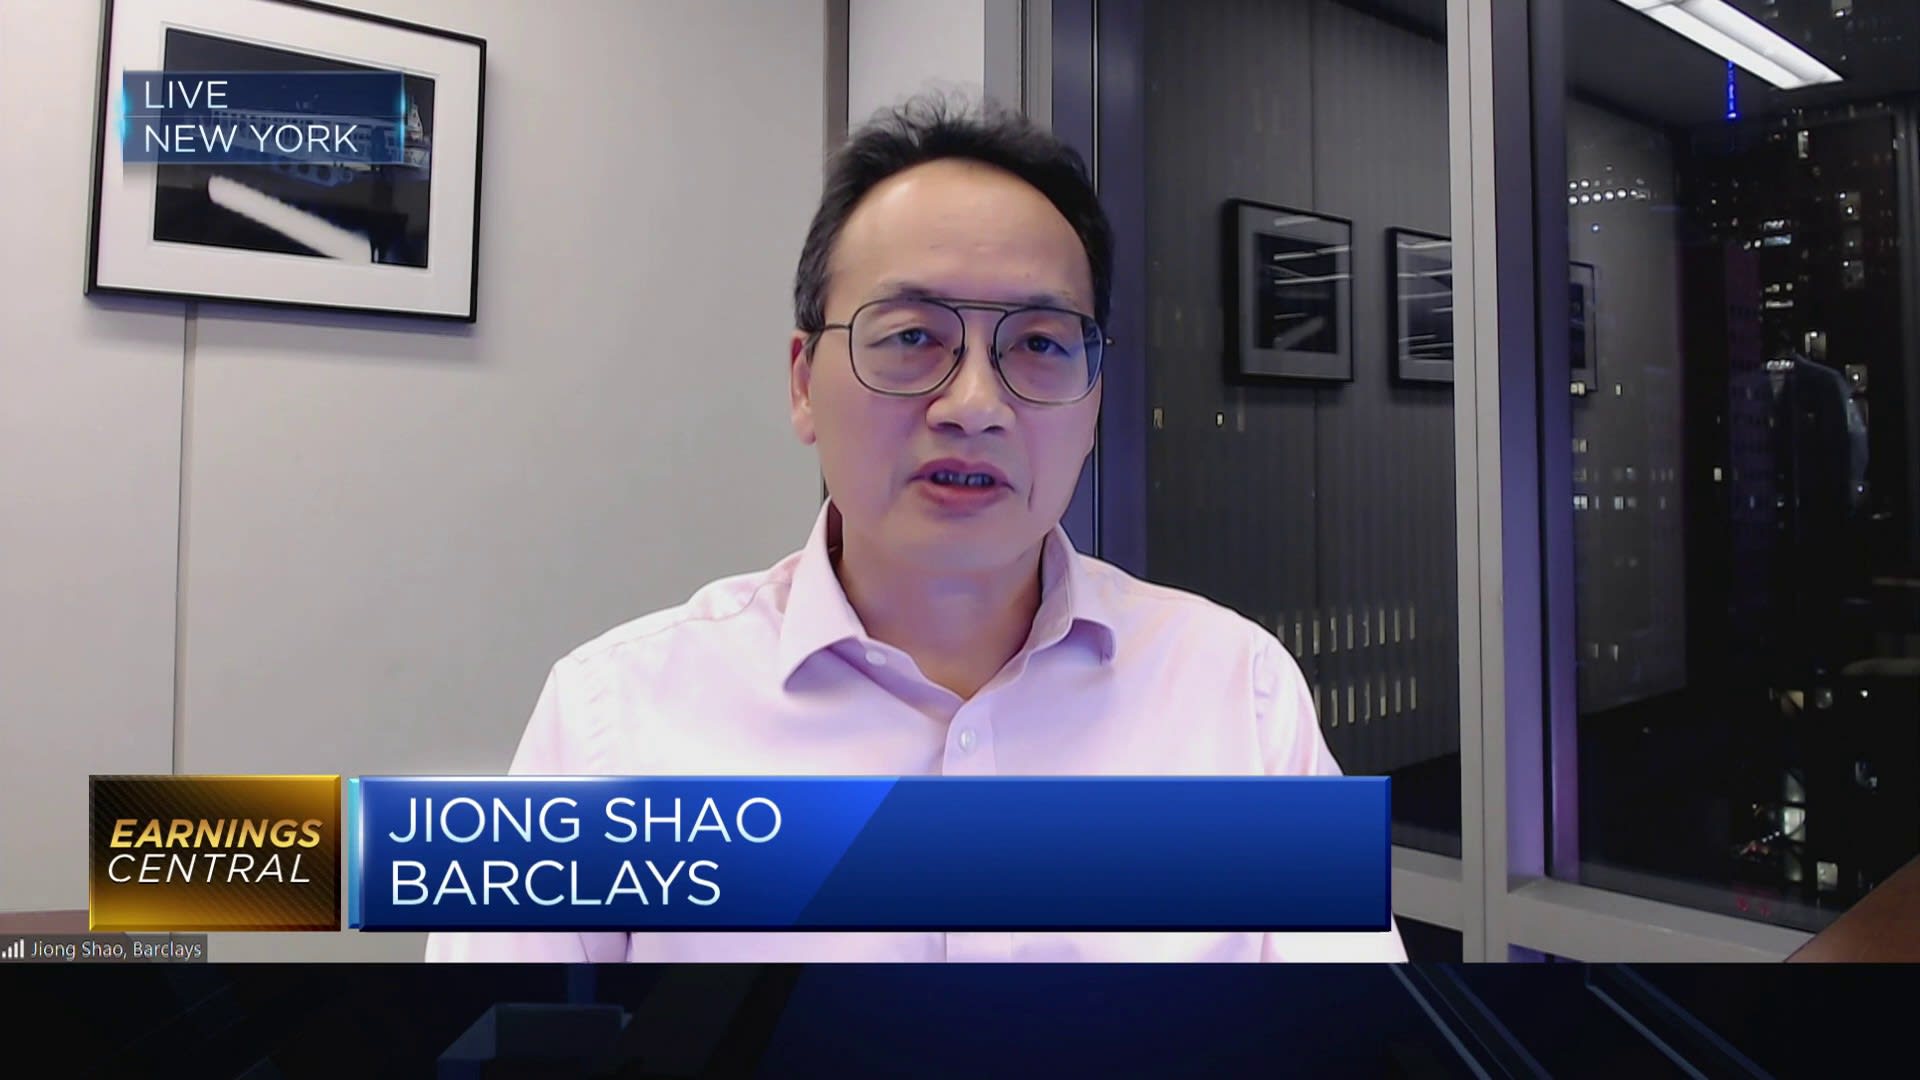 Barclays analyst discusses overweight ratings for JD.com and Baidu [Video]